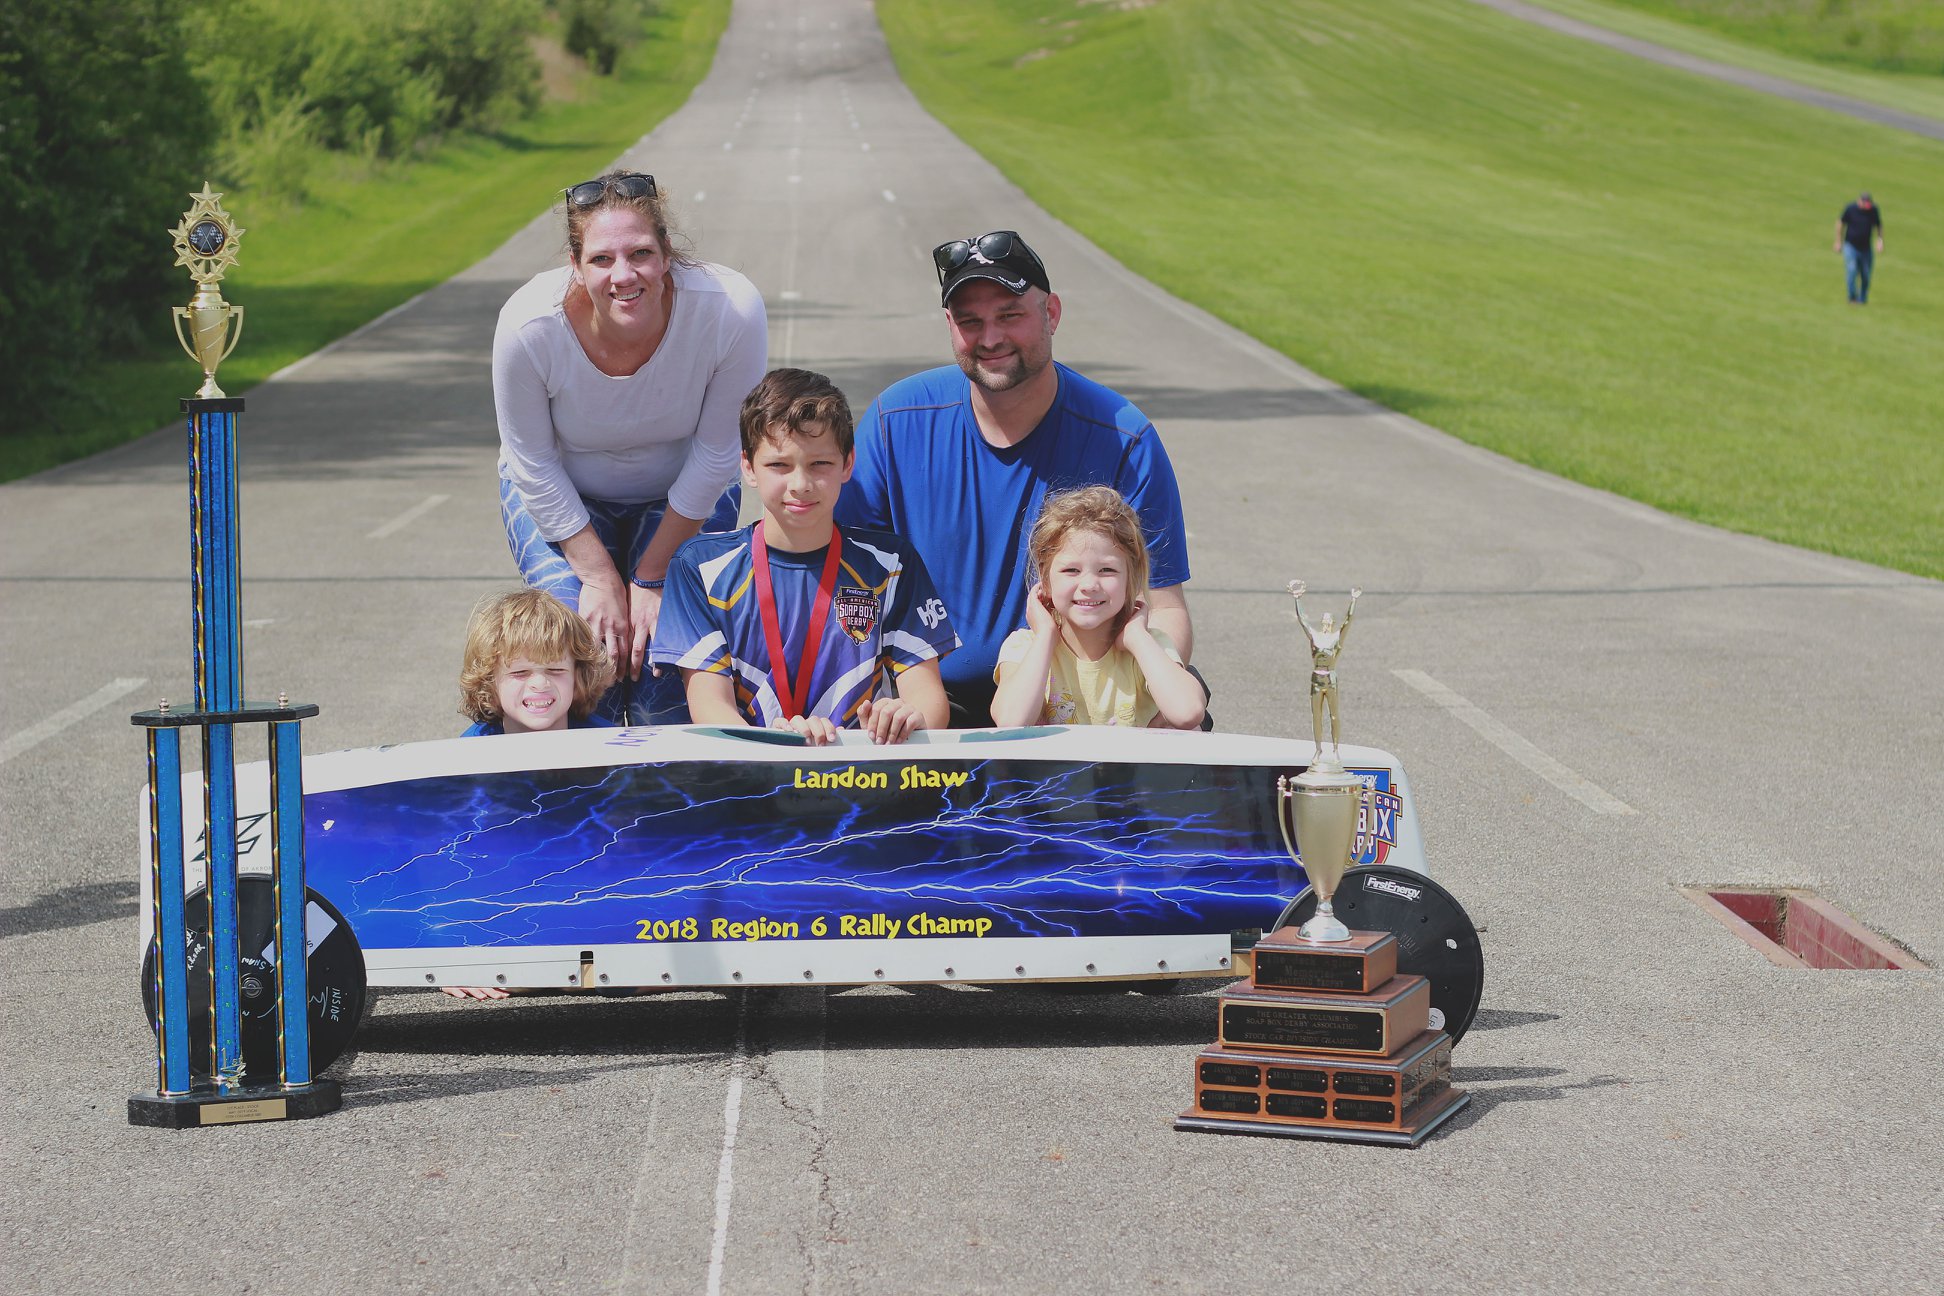 Columbus Soap Box Derby: Skill, thrill combine for day of racing